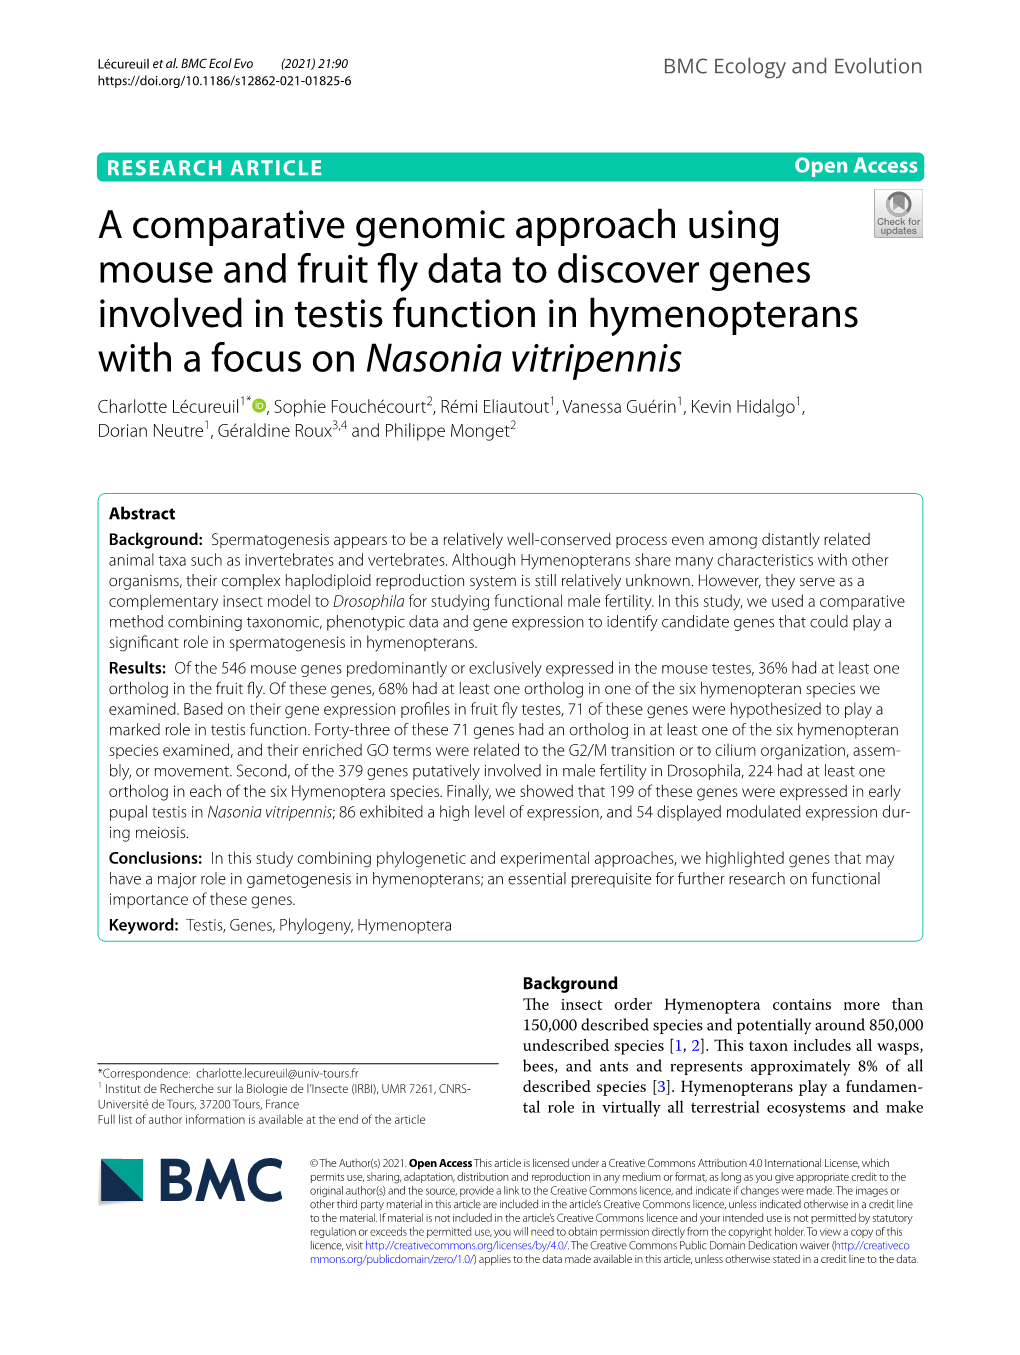 A Comparative Genomic Approach Using Mouse and Fruit Fly Data To